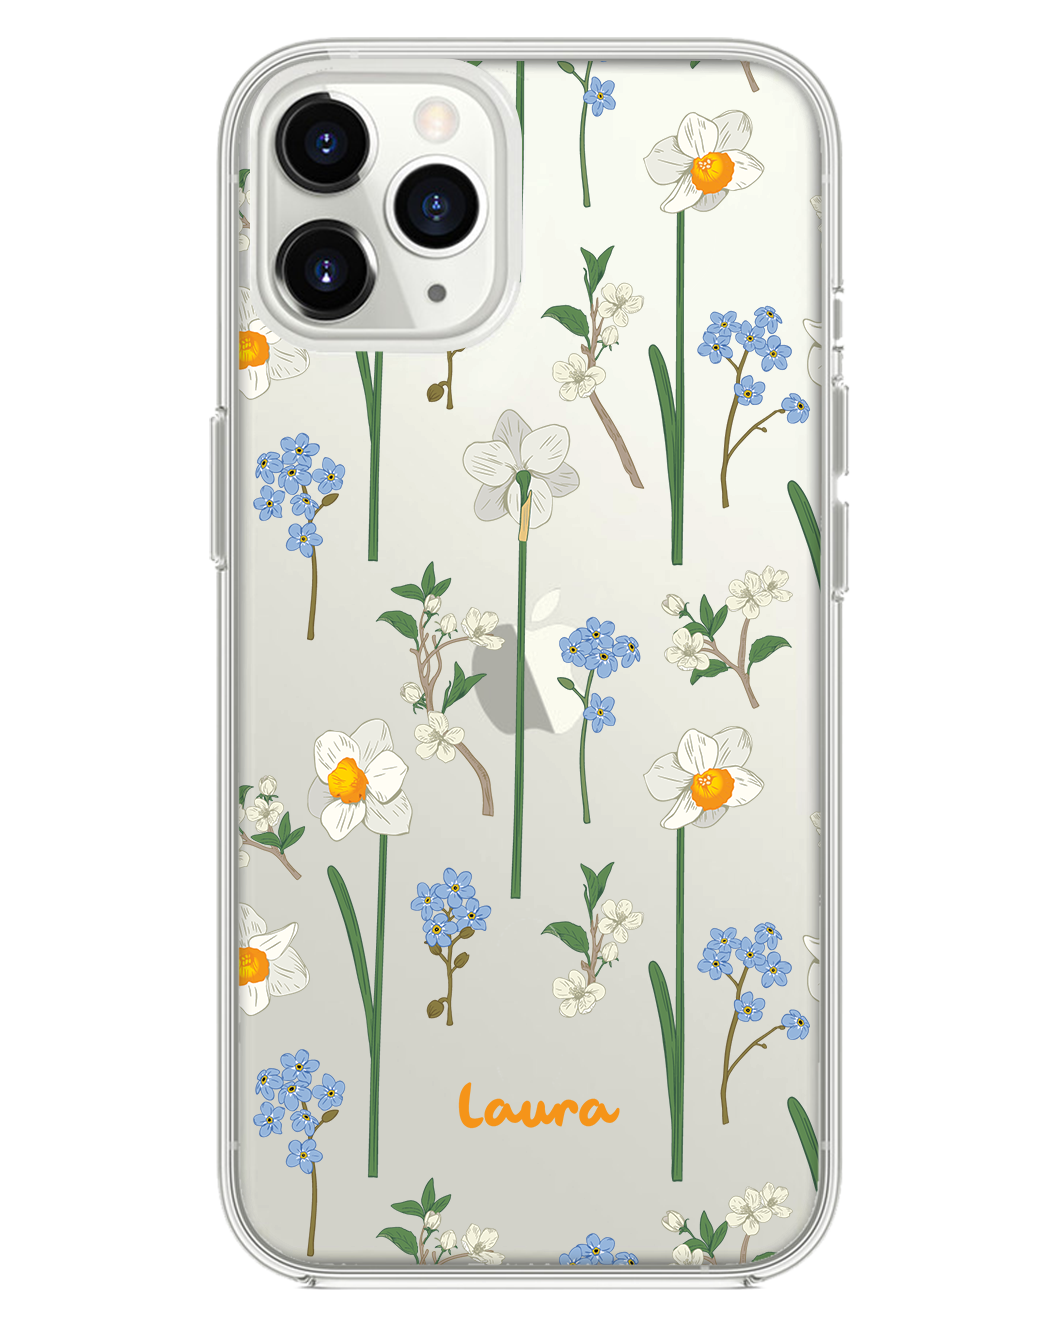 iPhone Rearguard Hybrid - December Narcissus